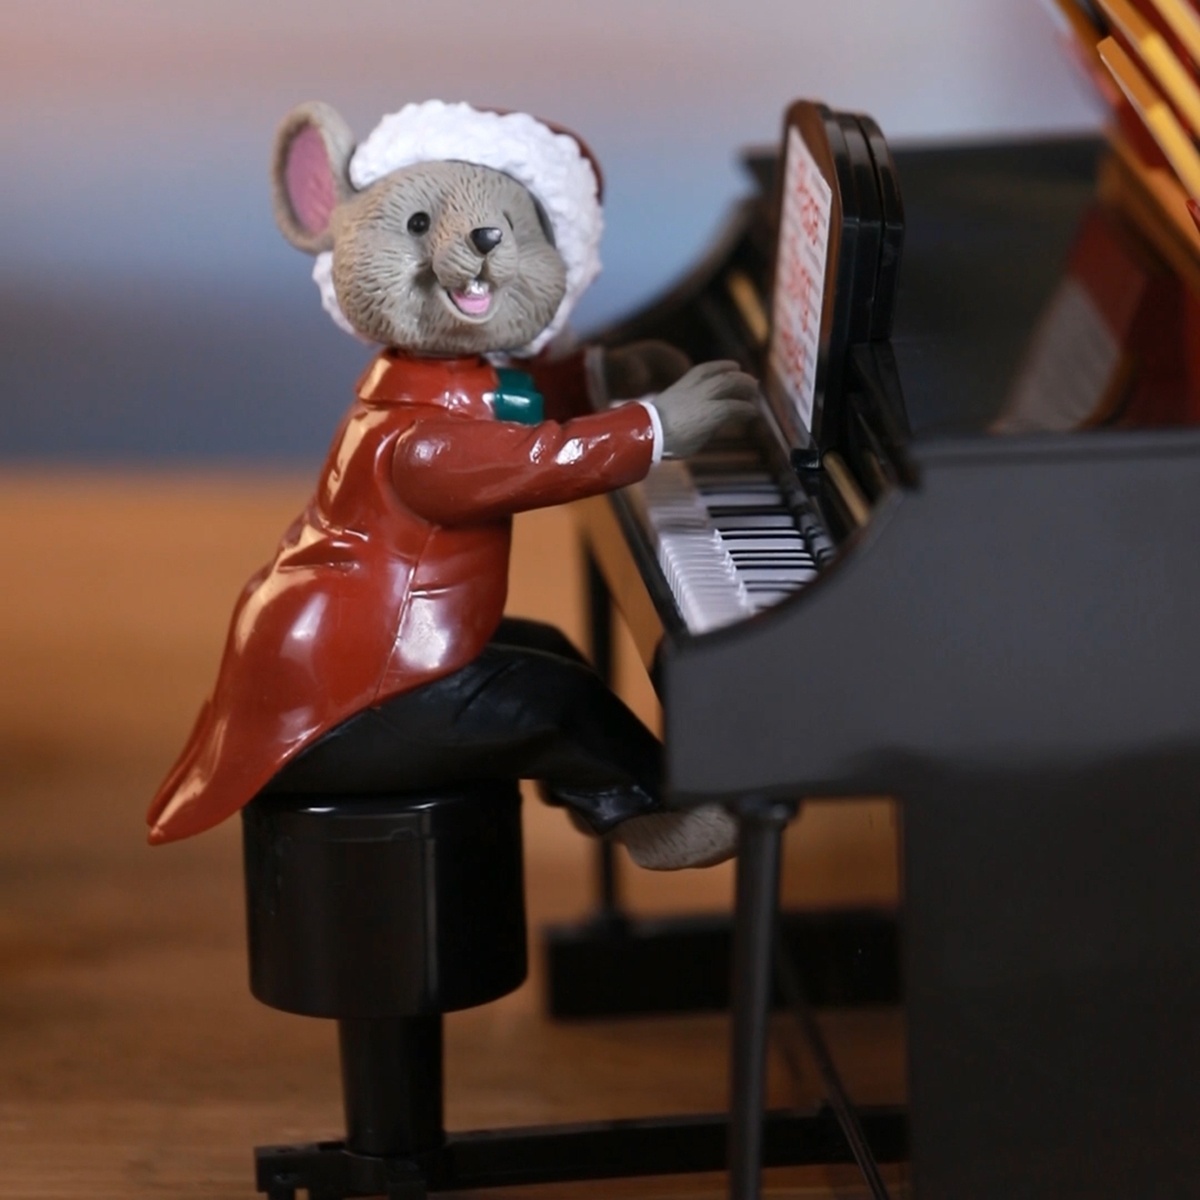 Mr. Christmas(R) Magical Maestro Mouse